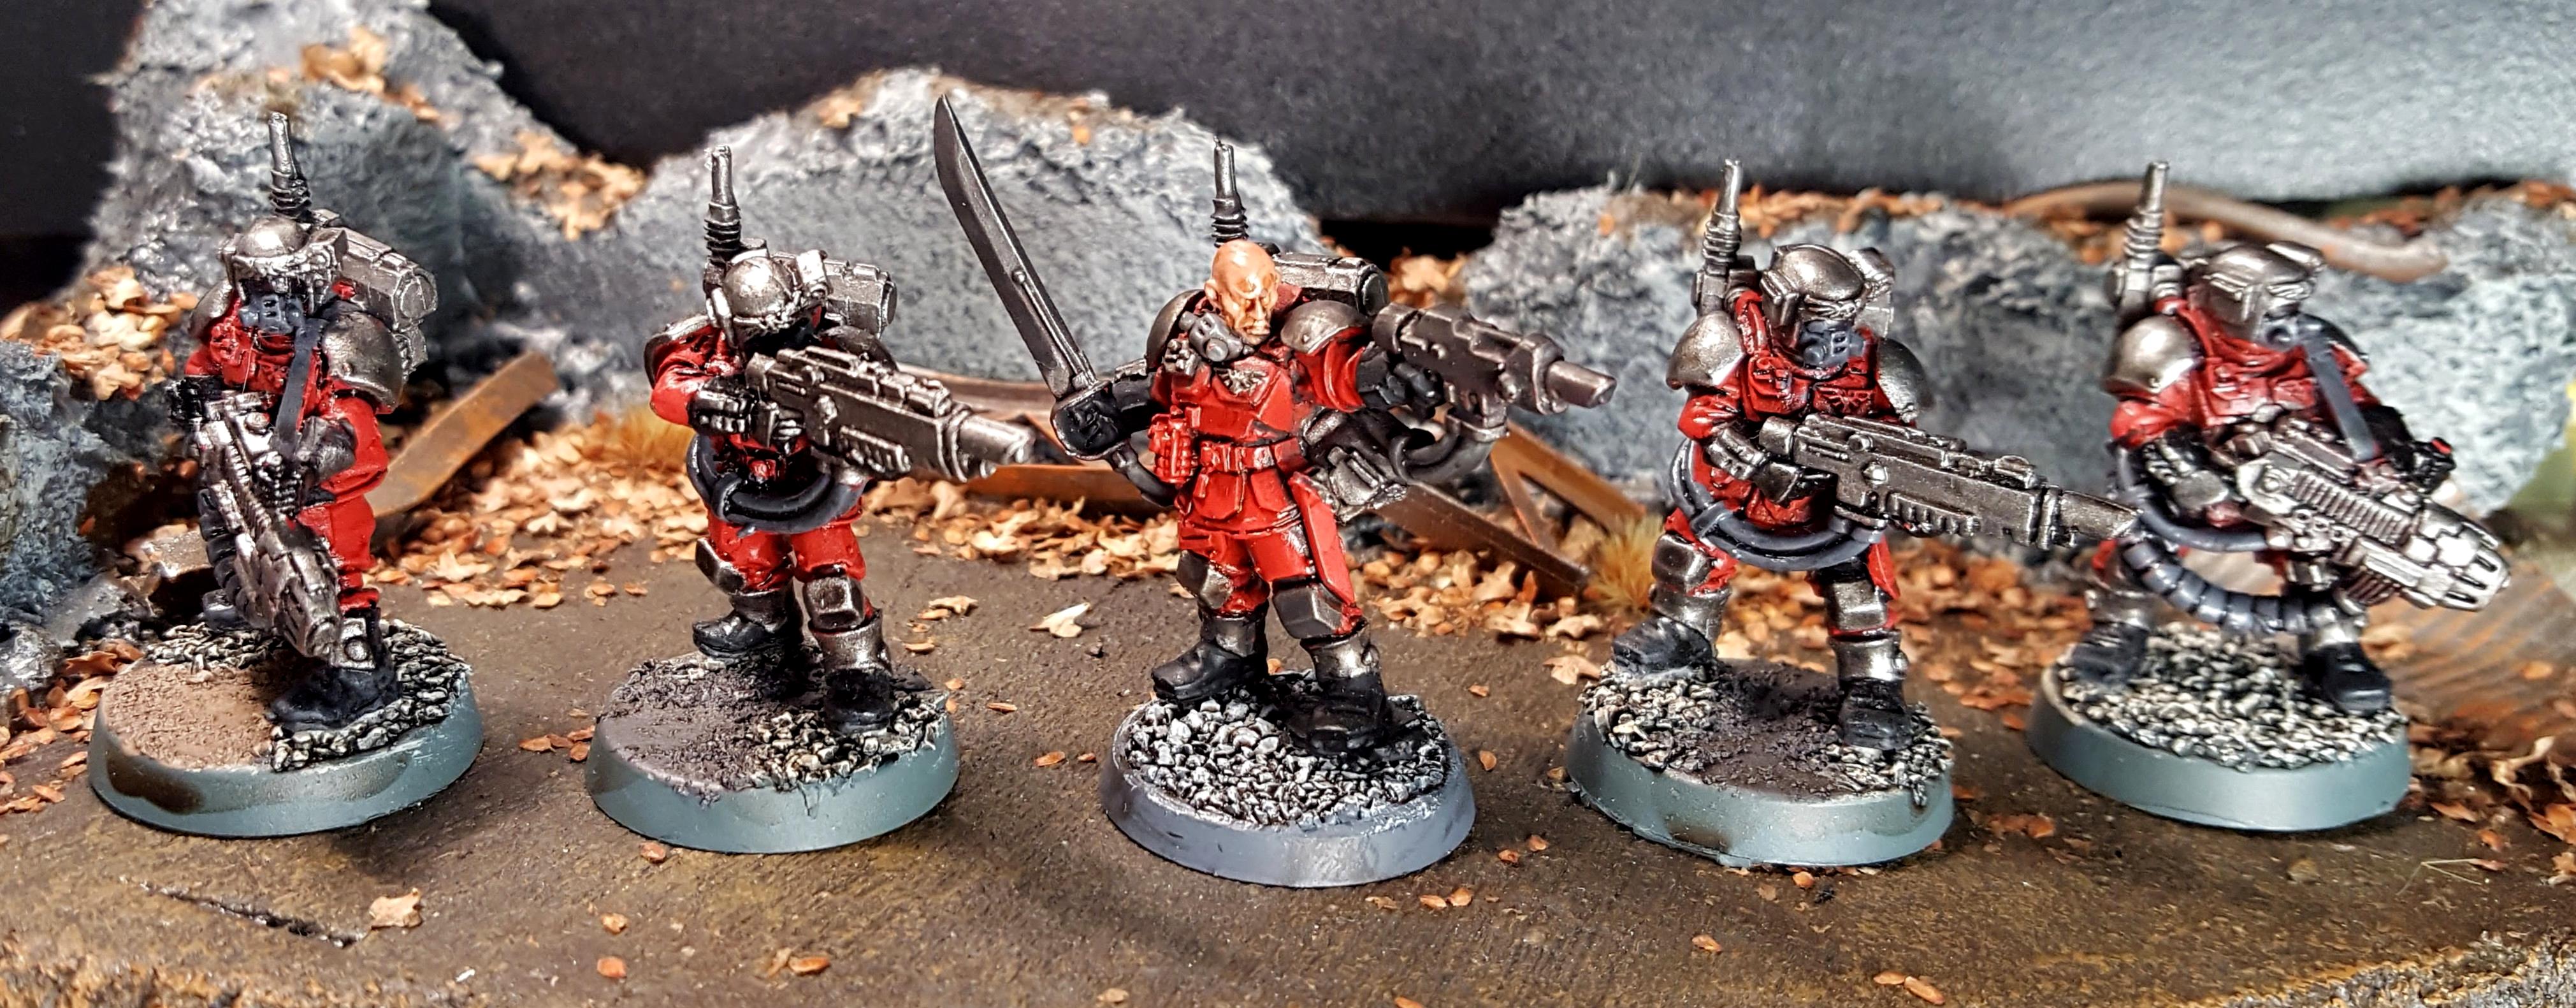 Scions in service to the Inquisition